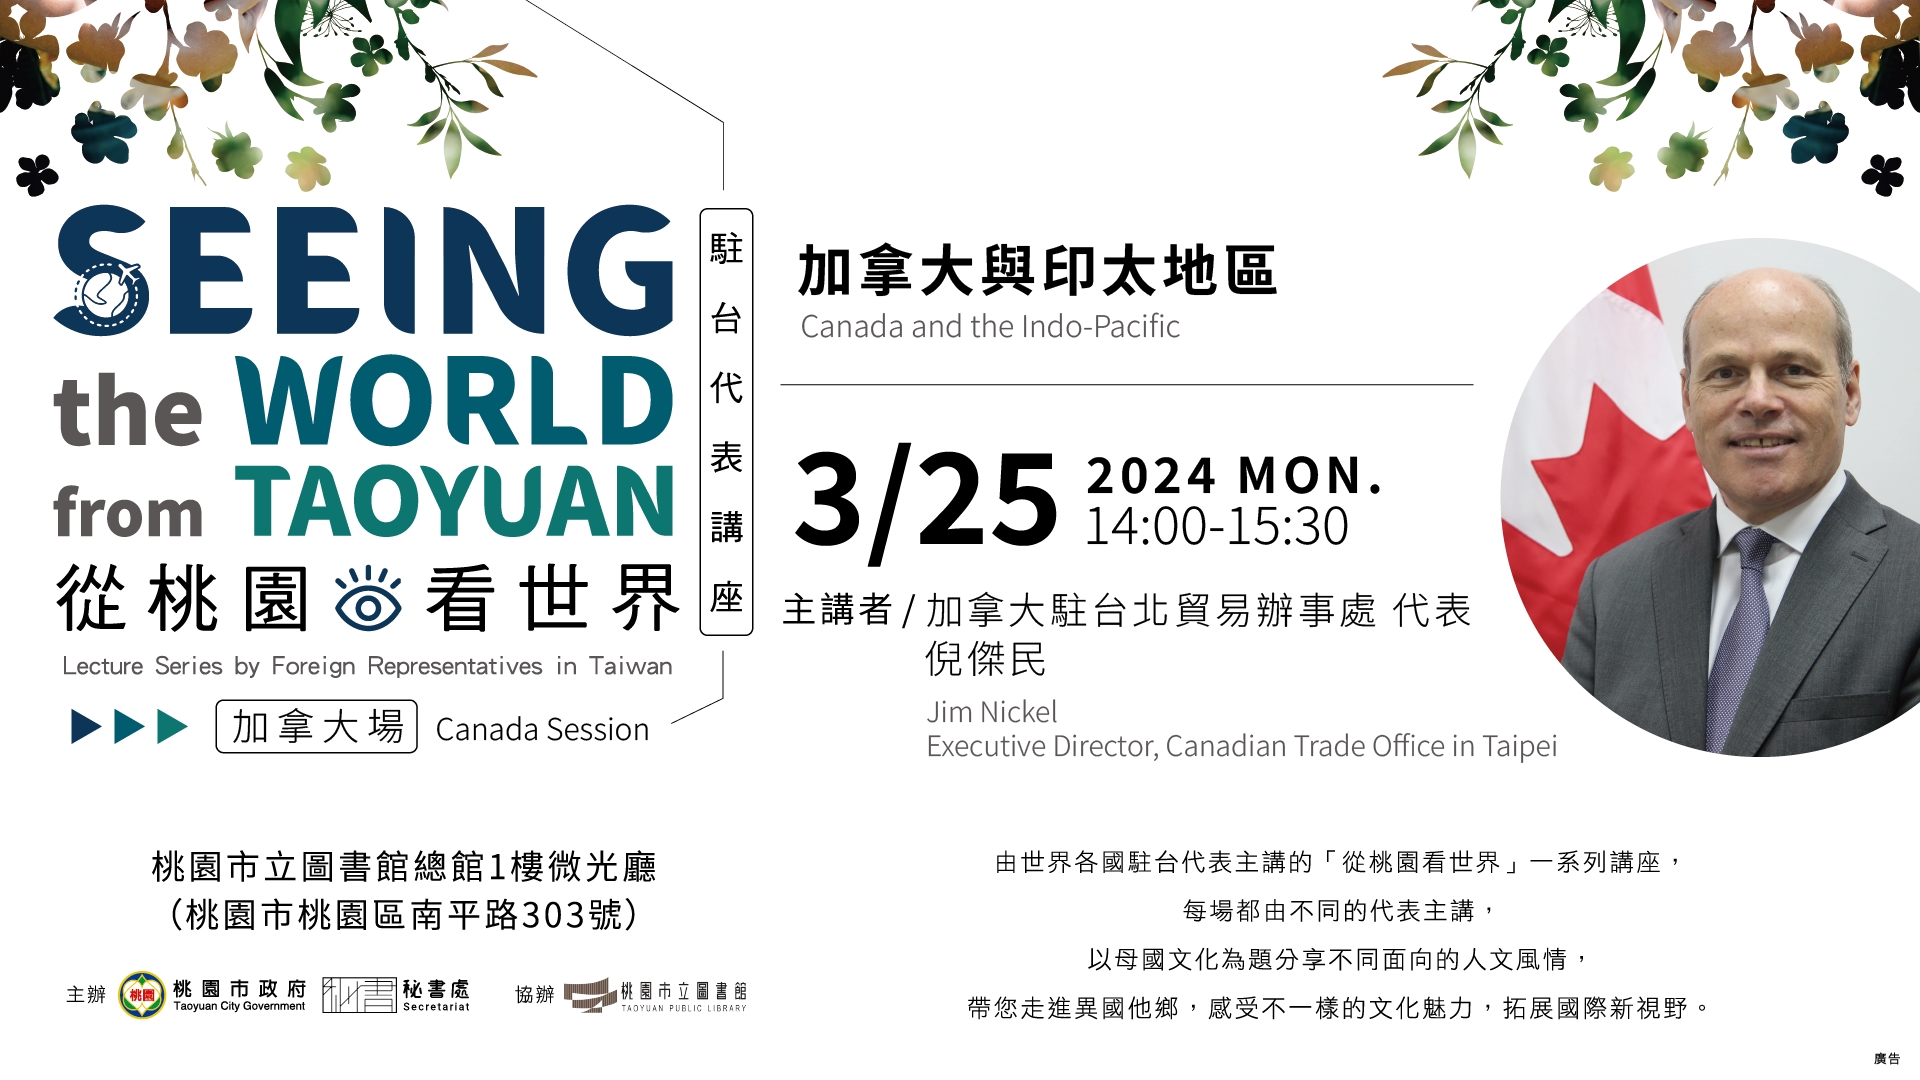 "Seeing the World from Taoyuan" Lecture Series by Foreign Representatives in Taiwan-India Session